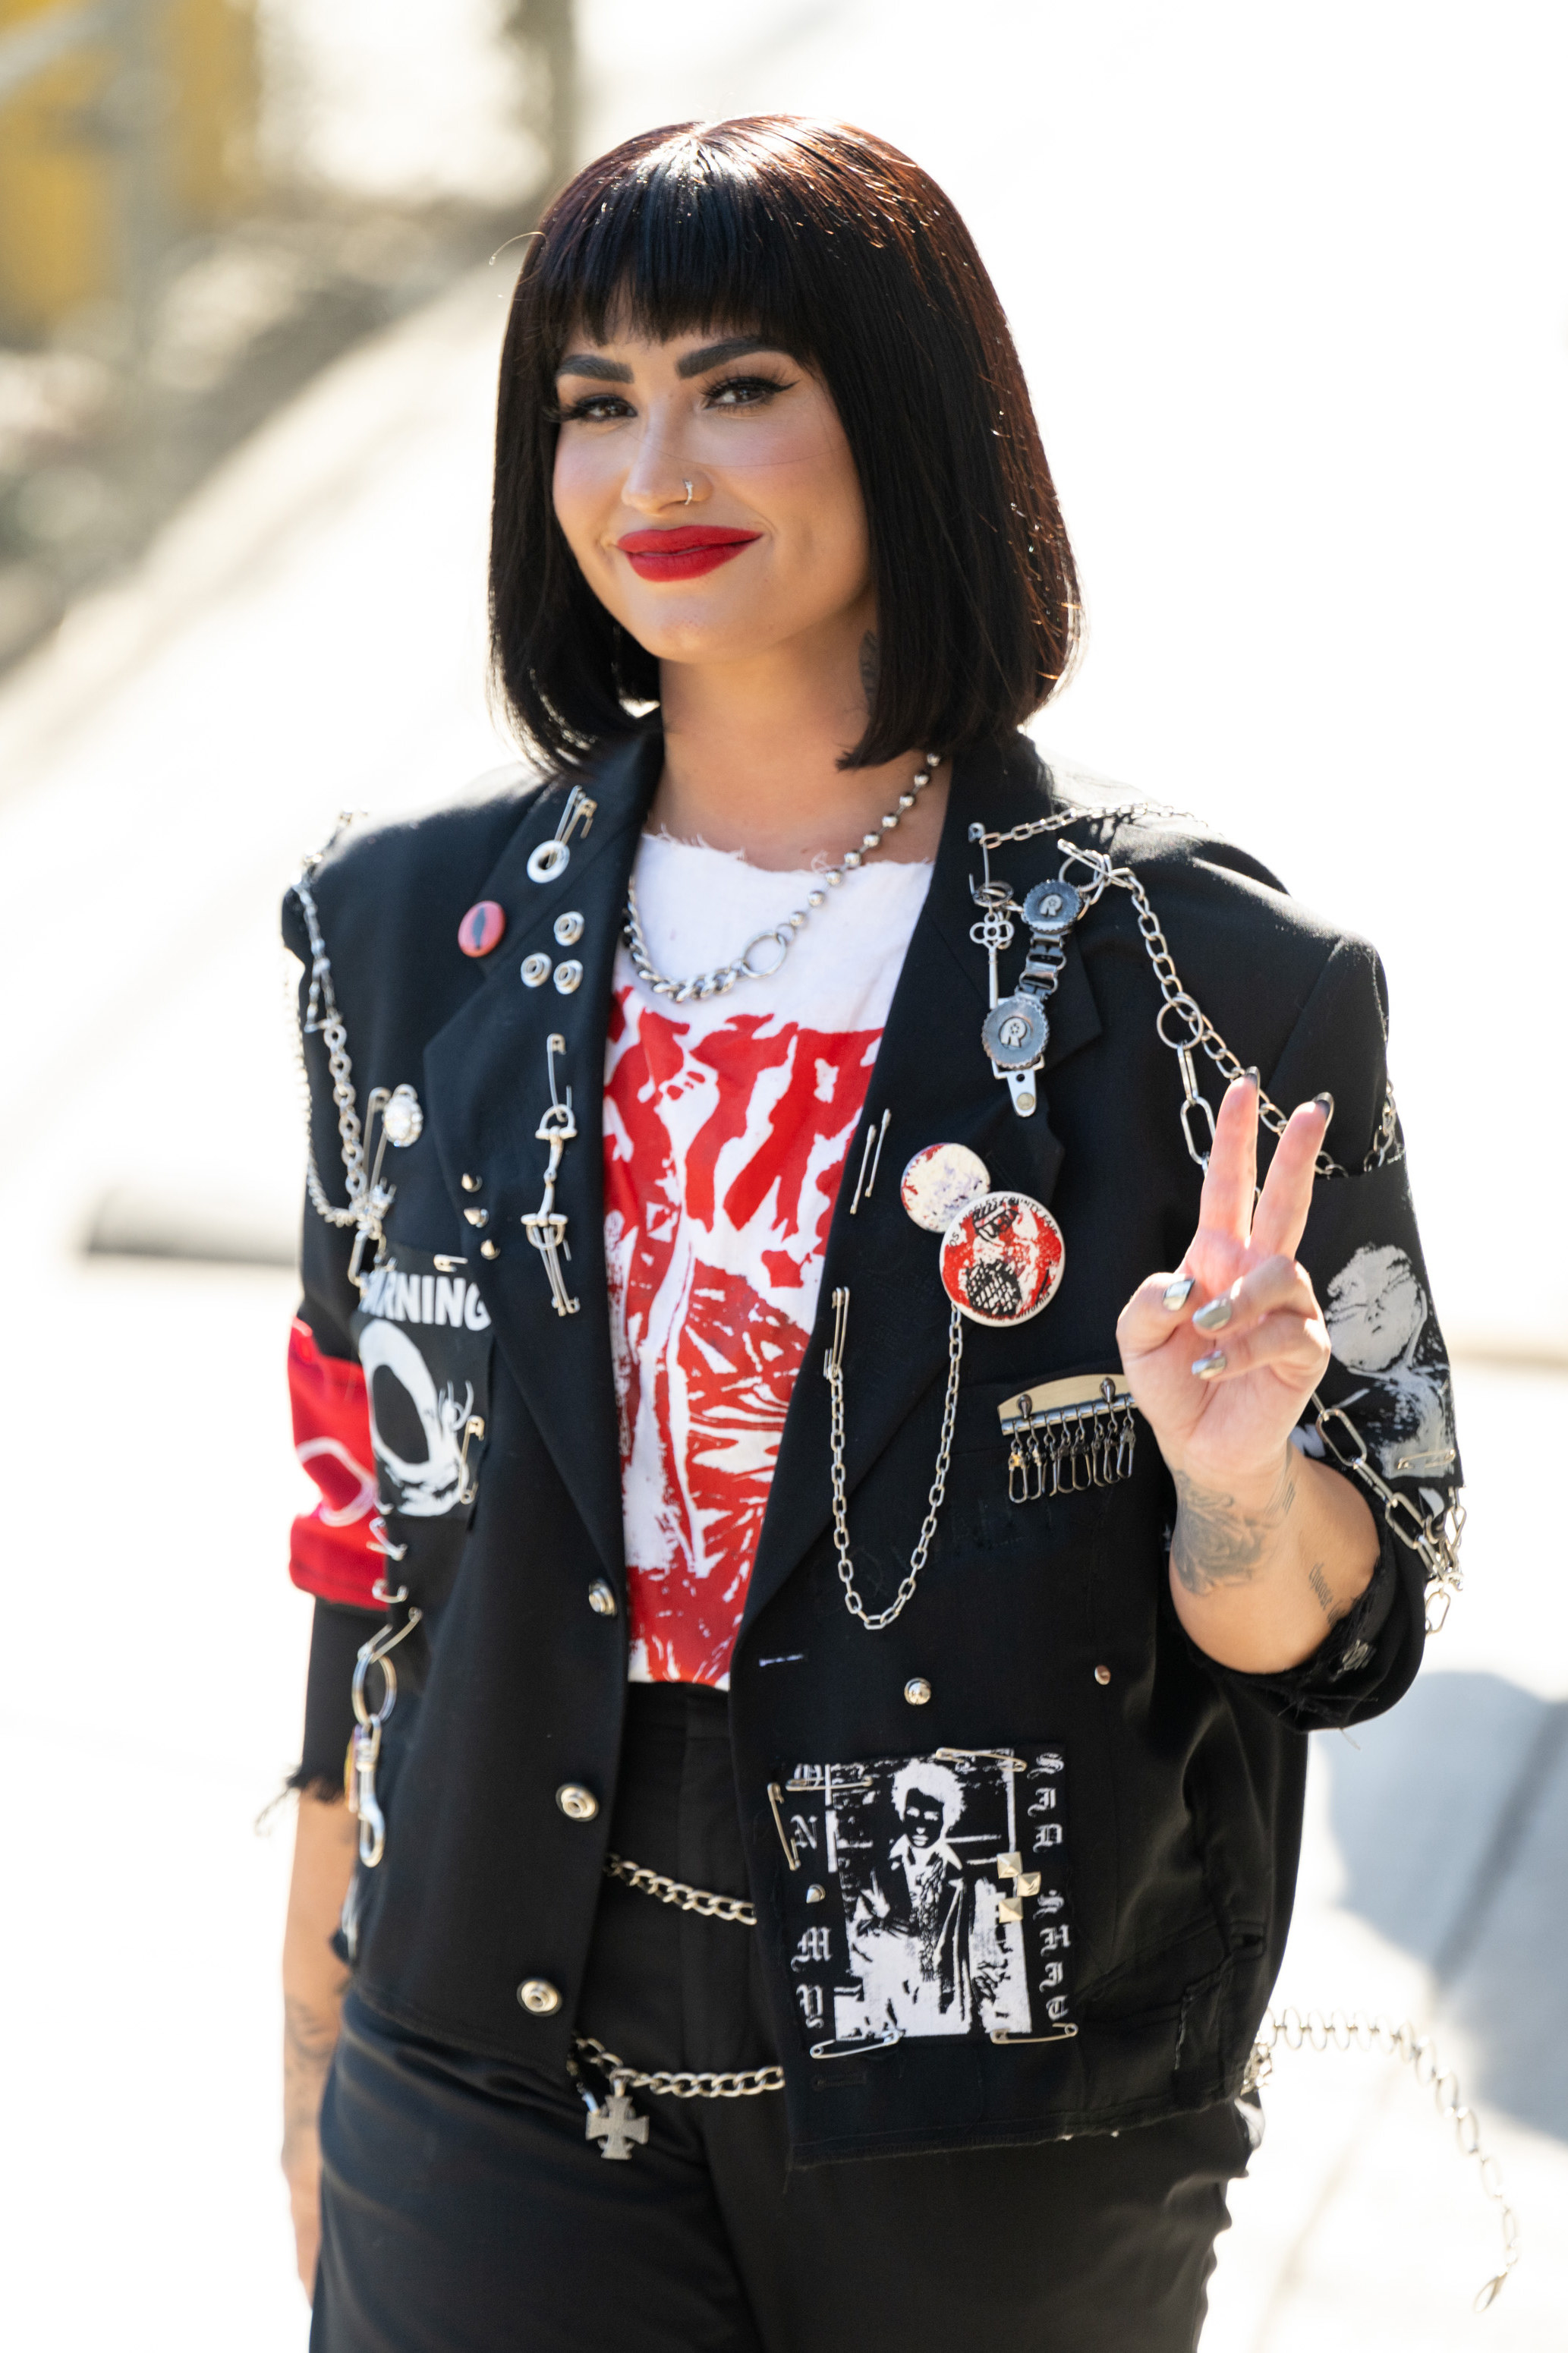 Demi throwing a peace sign while walking outside